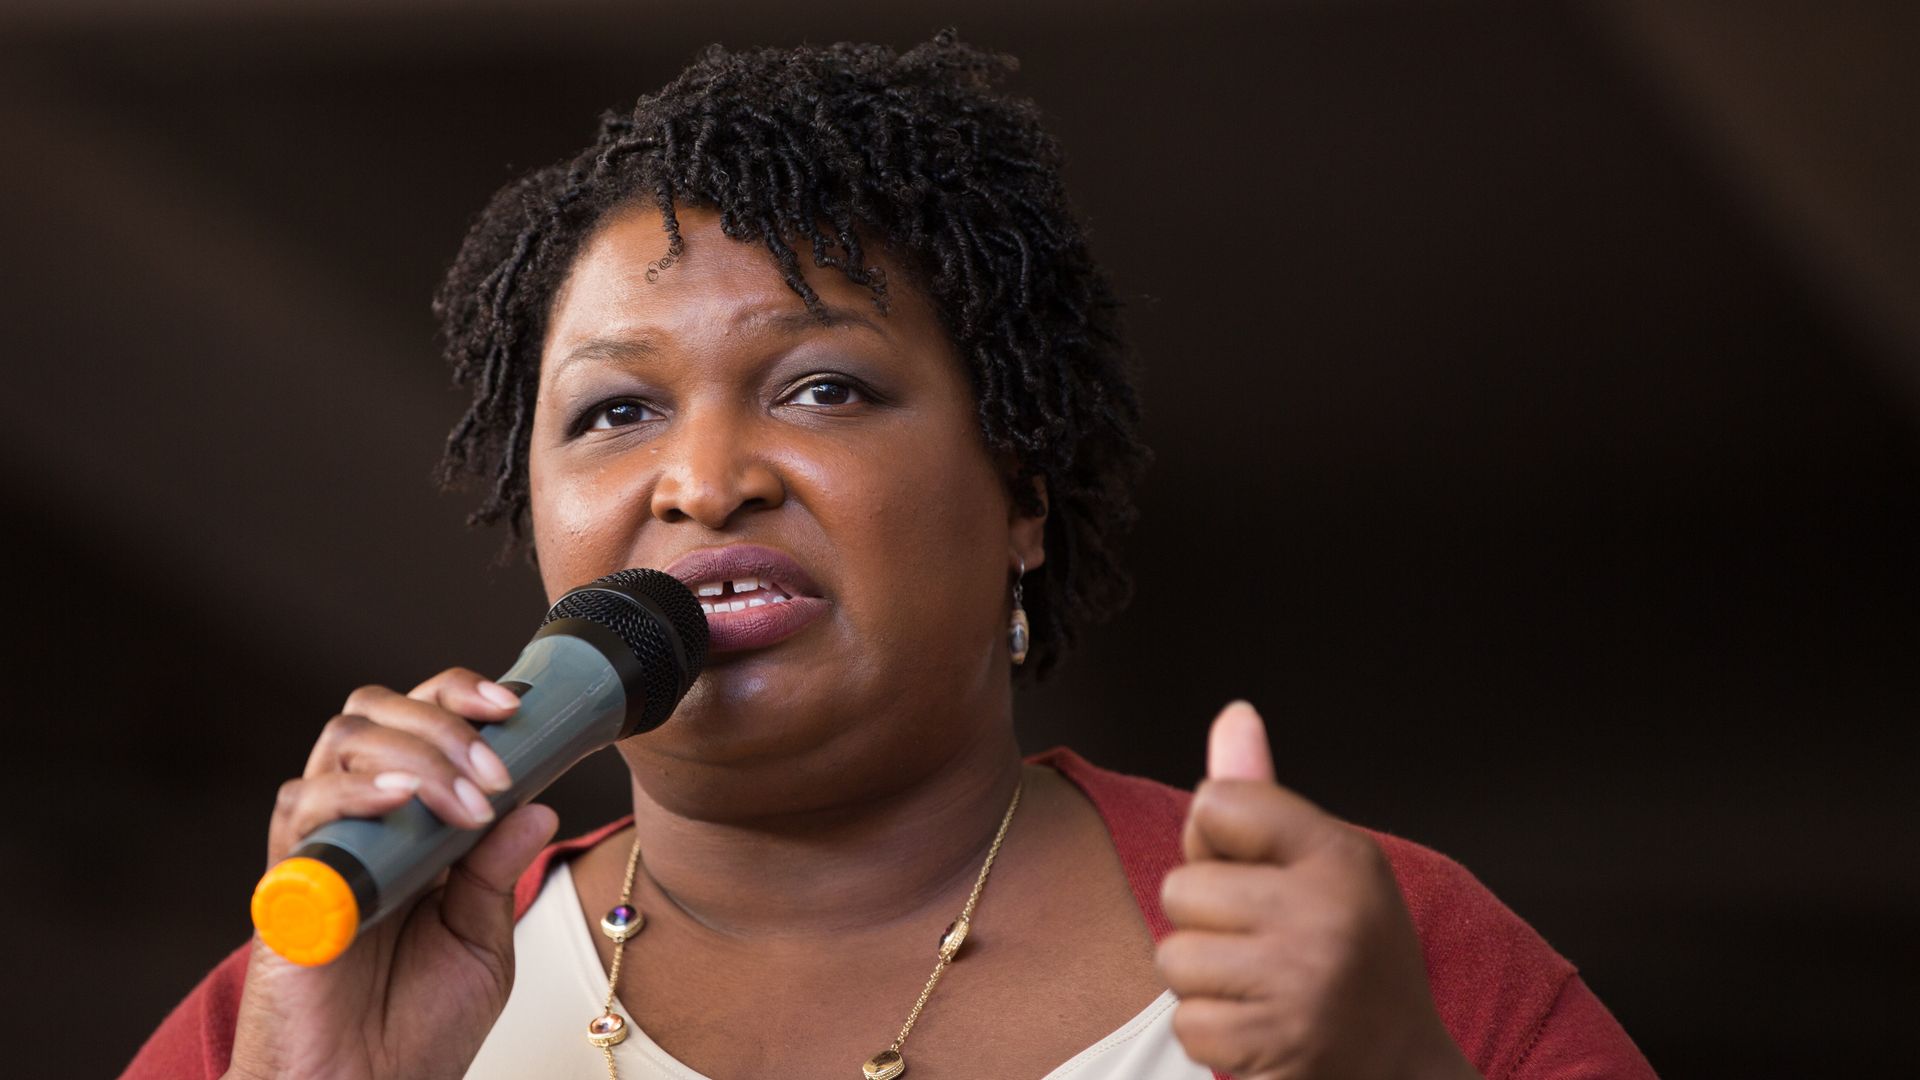 In this image, Abrams speaks to a crowd while holding a microphone.